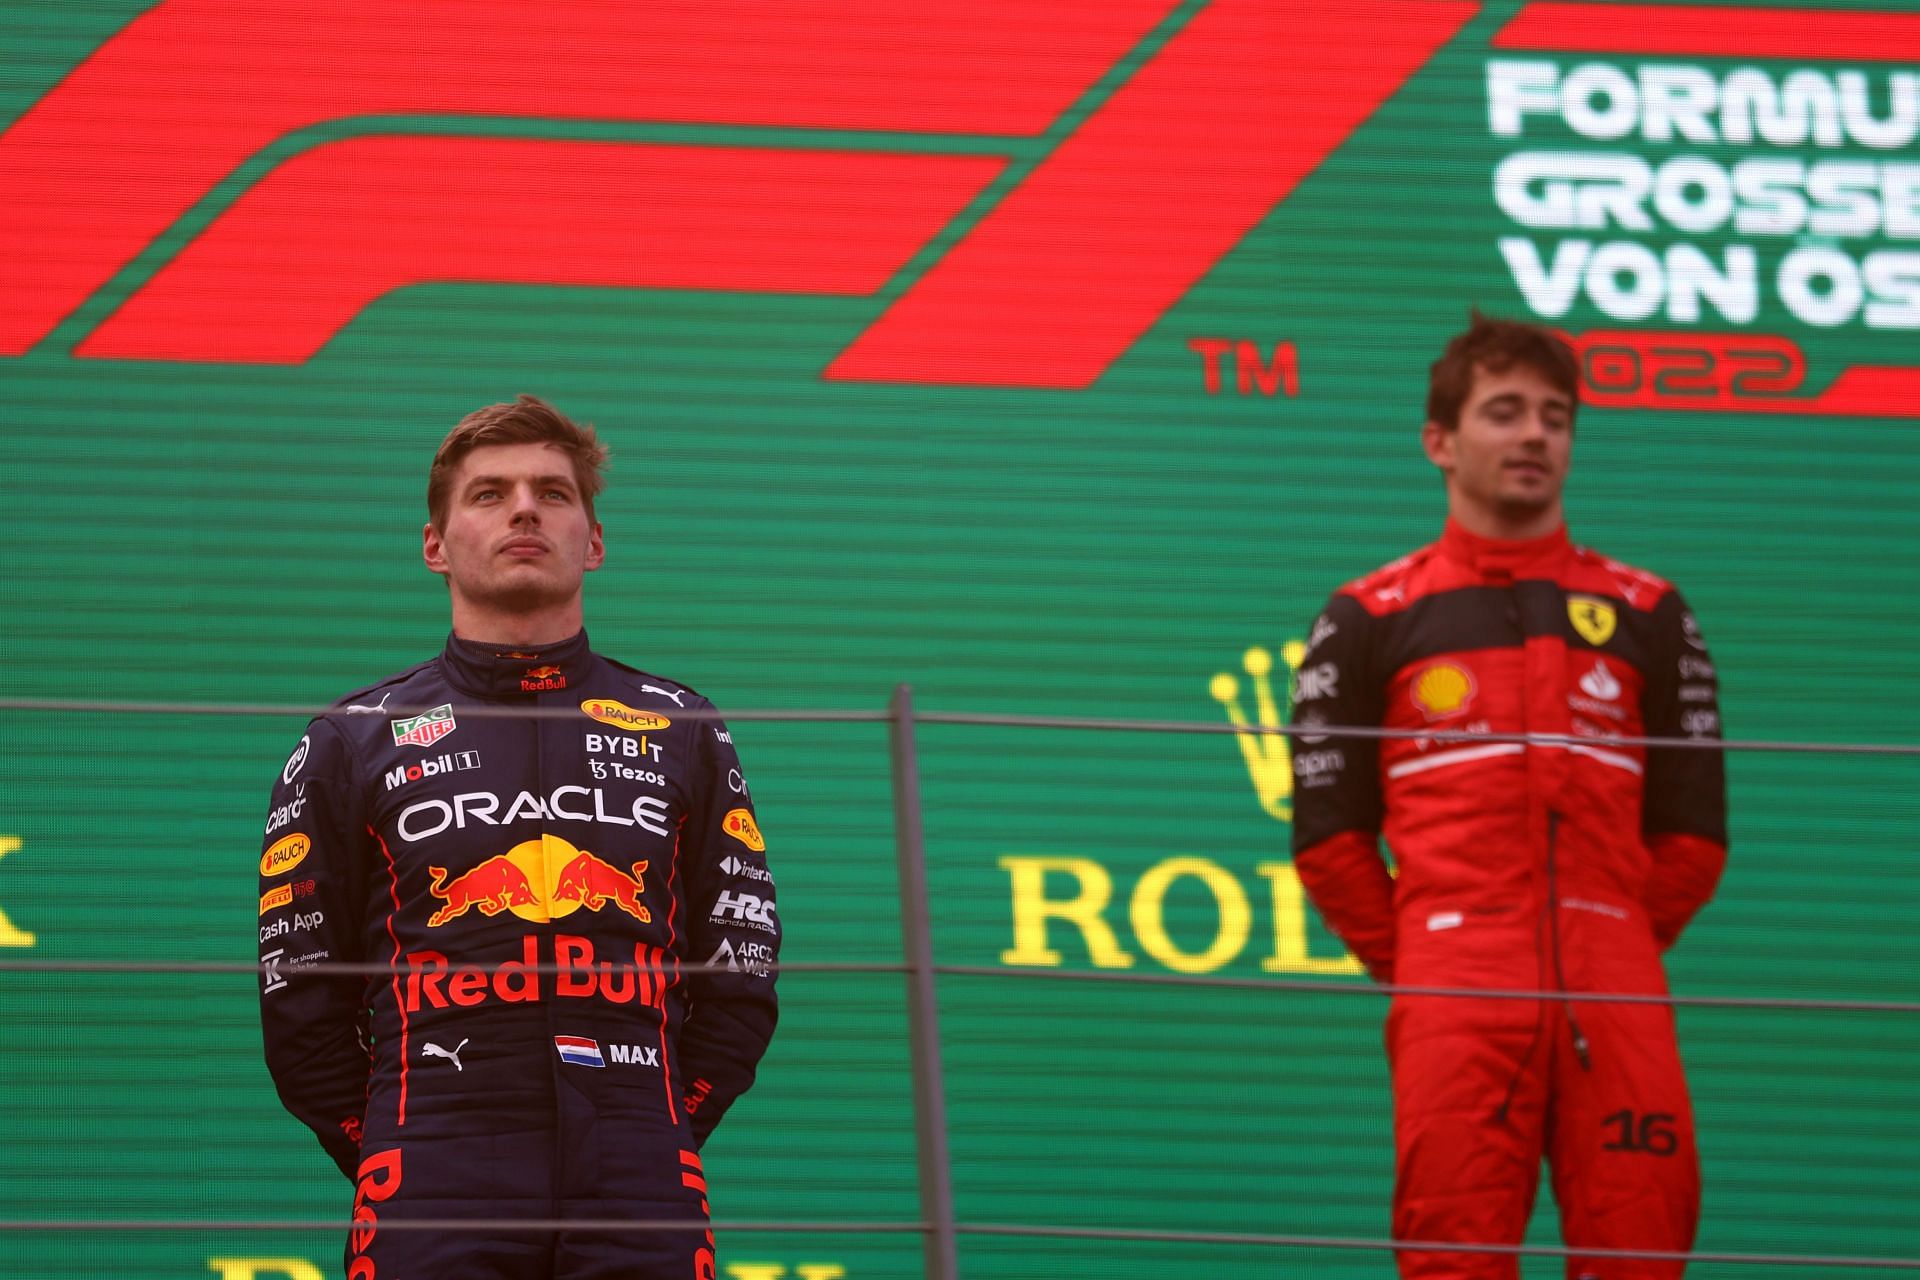 Max Verstappen lost out to Charles Leclerc in Austria